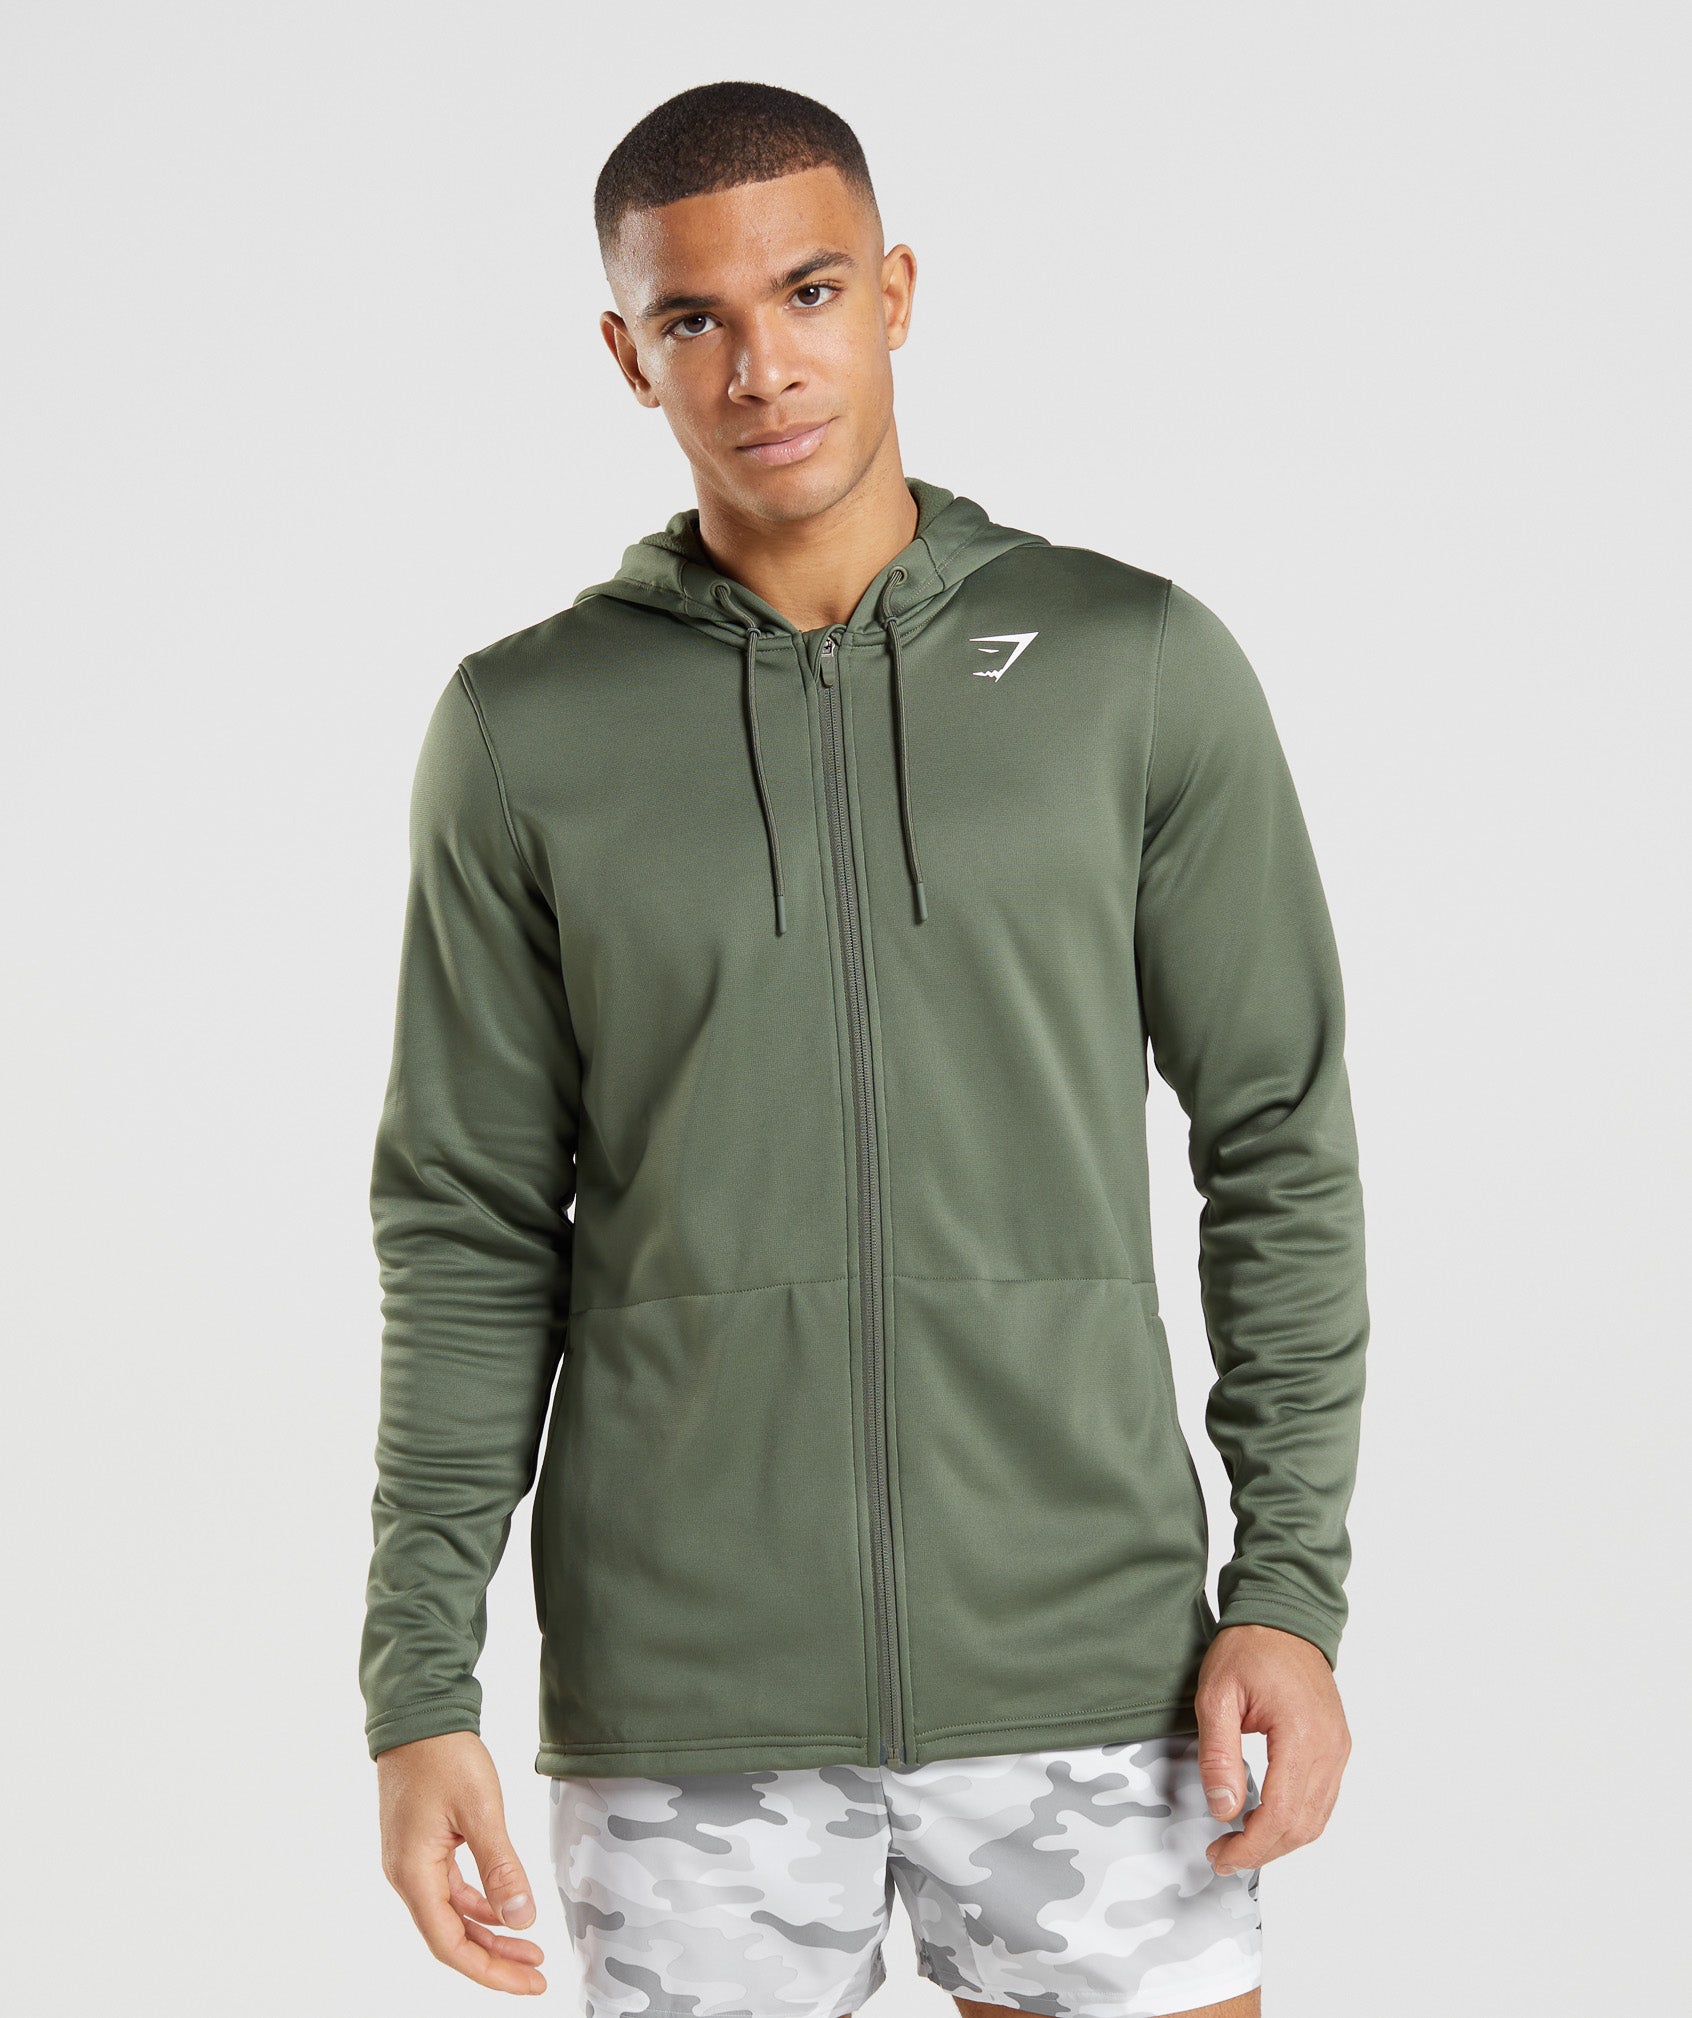 Arrival Zip Up Hoodie in Core Olive - view 1